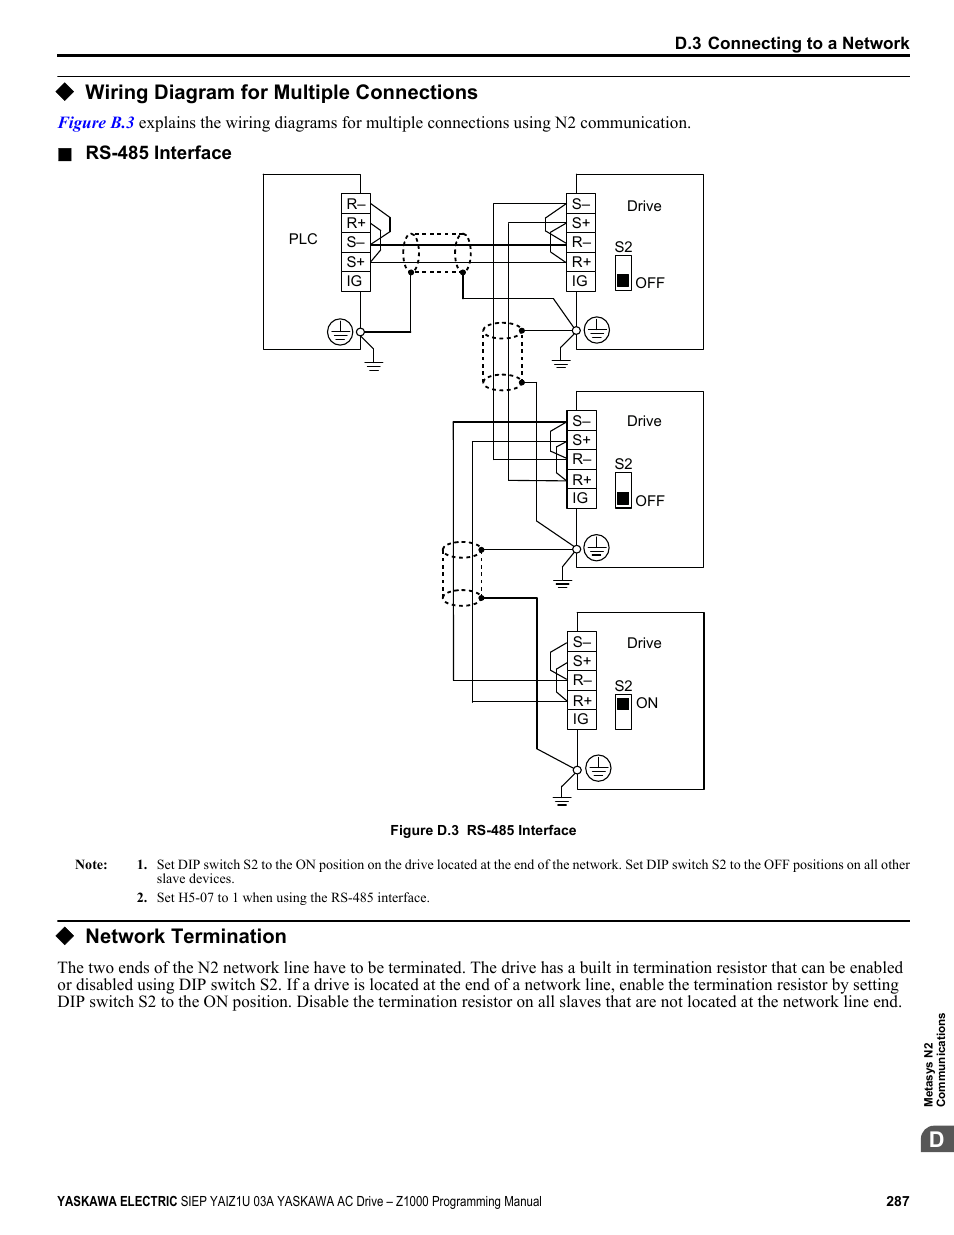 Wiring diagram for multiple connections, Network termination | Yaskawa AC Drive Z1000 AC Drive HVAC Fan User Manual | Page 287 / 340